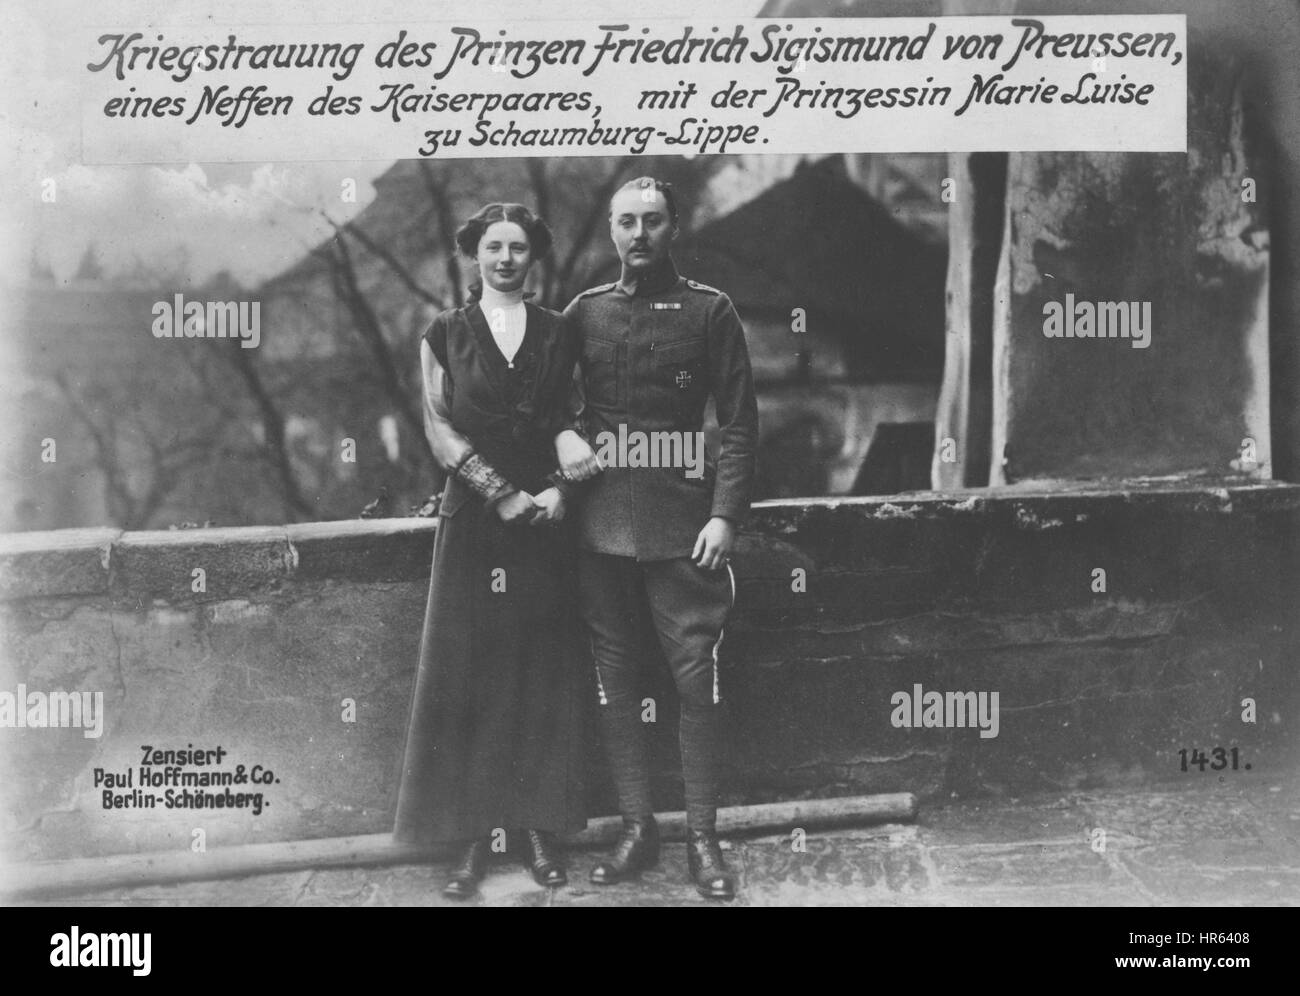 Prince Friedrich Sigismund of Prussia and Princess Marie-Luise of Schaumburg-Lippe, Germany, 1915. From the New York Public Library. Stock Photo